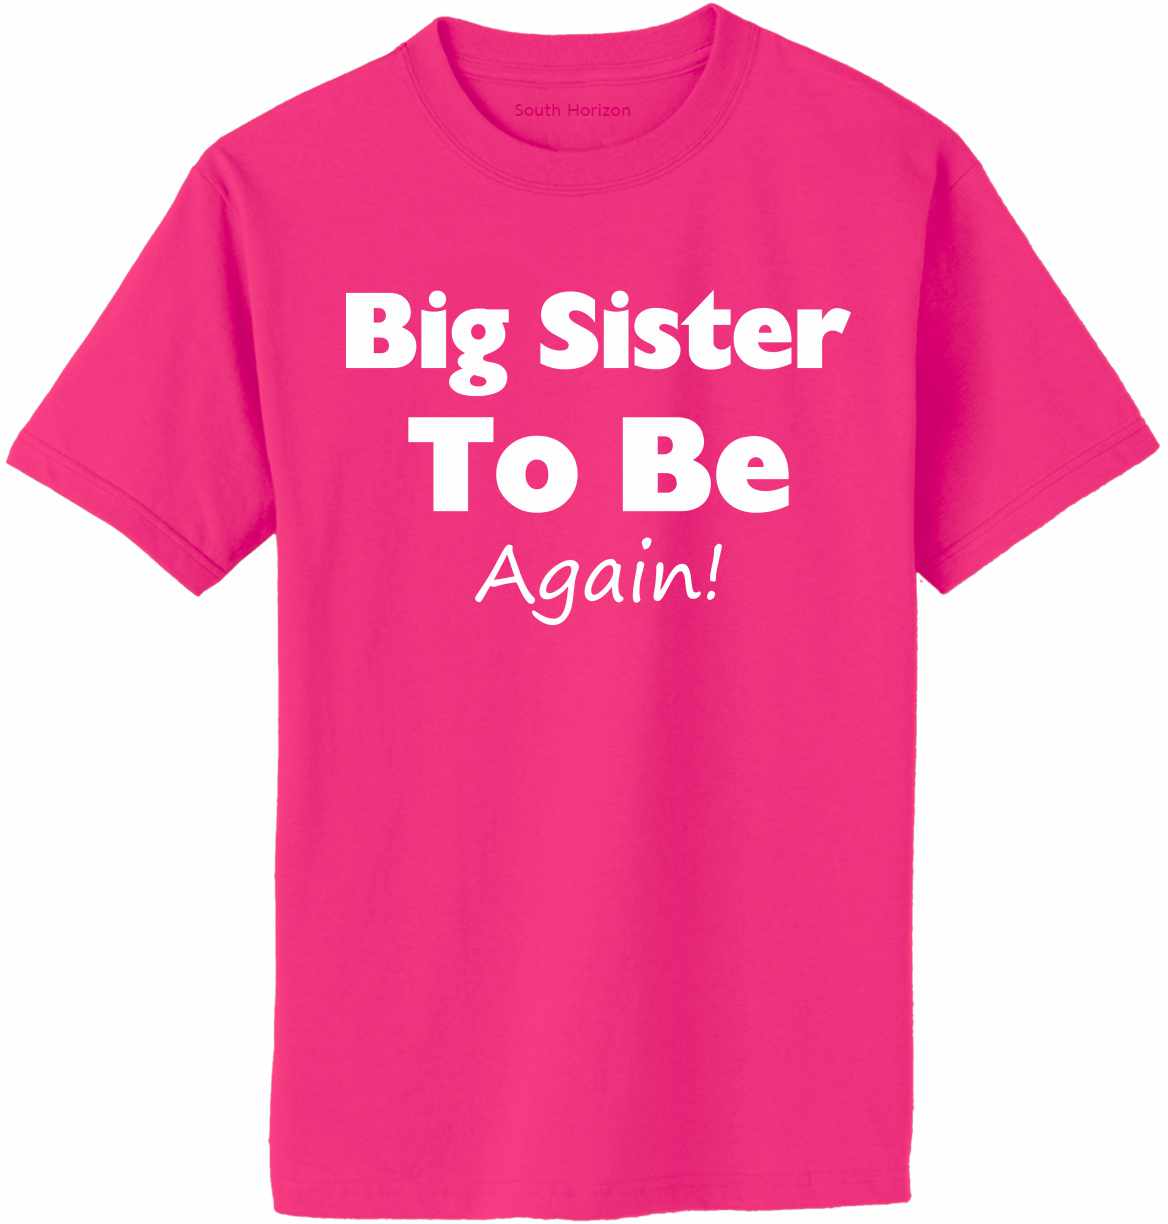 Big Sister To Be Again Adult T-Shirt (#877-1)